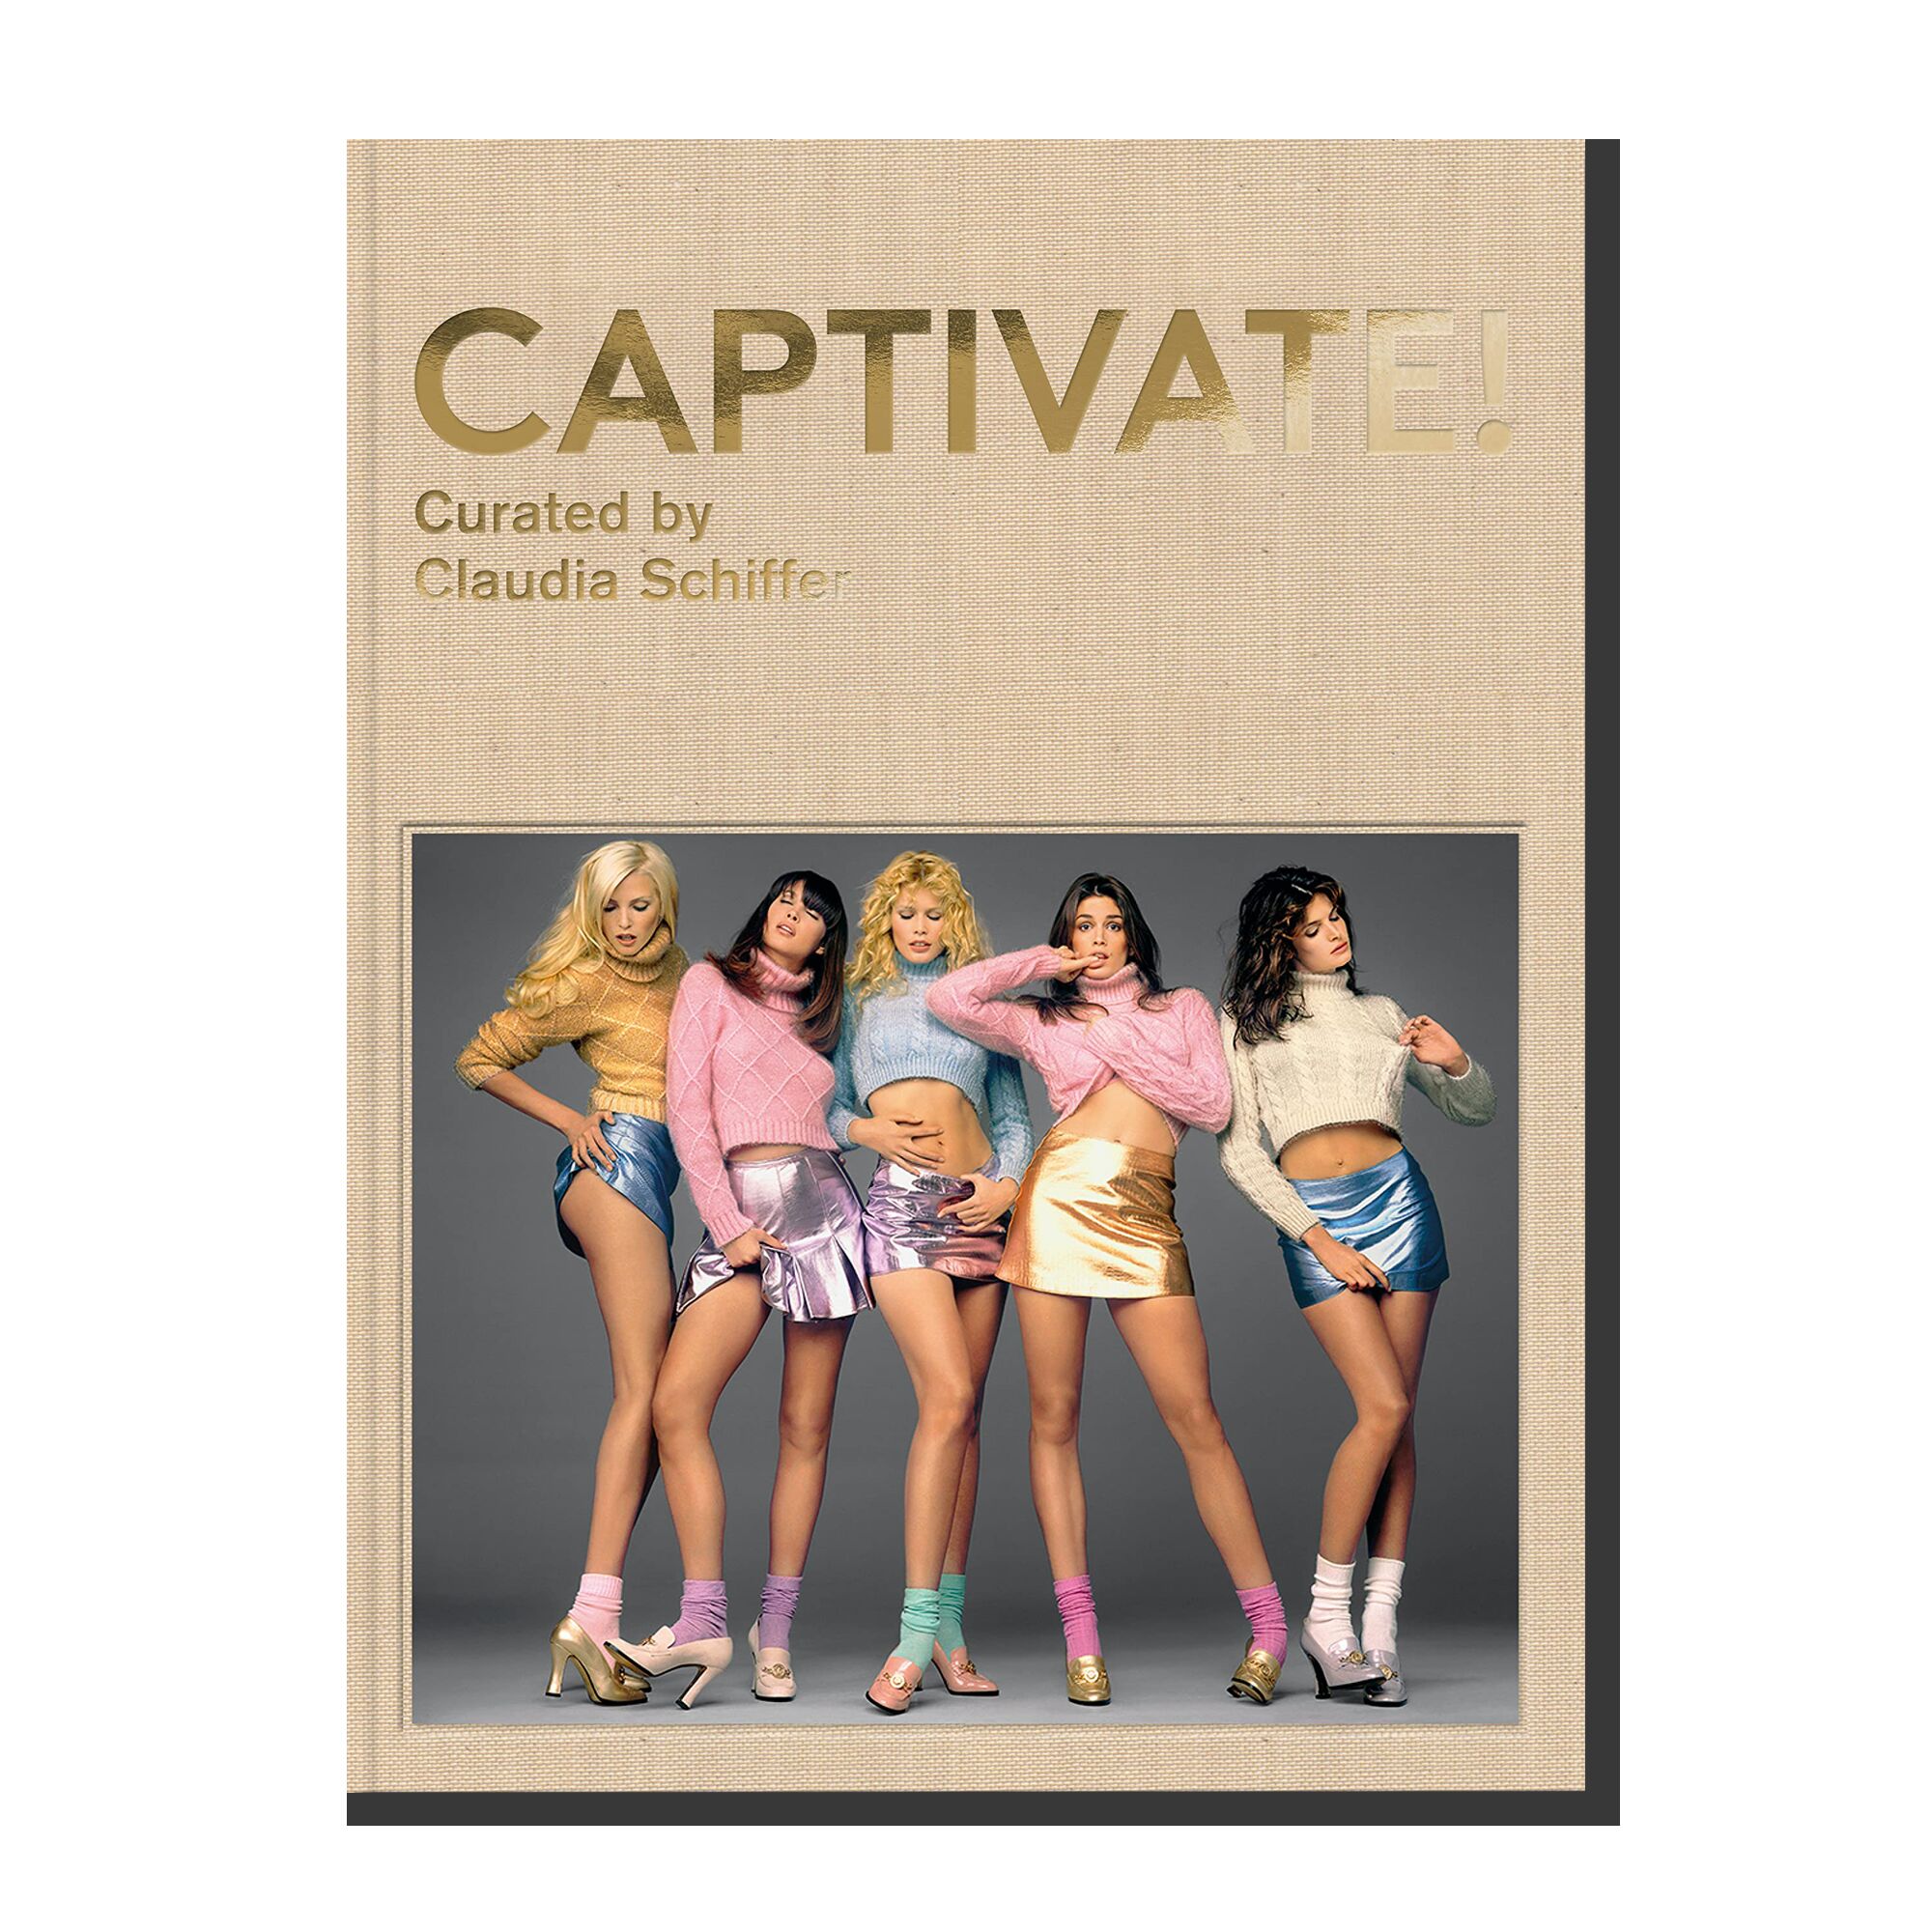 Captivate!: Fashion Photography from the '90s